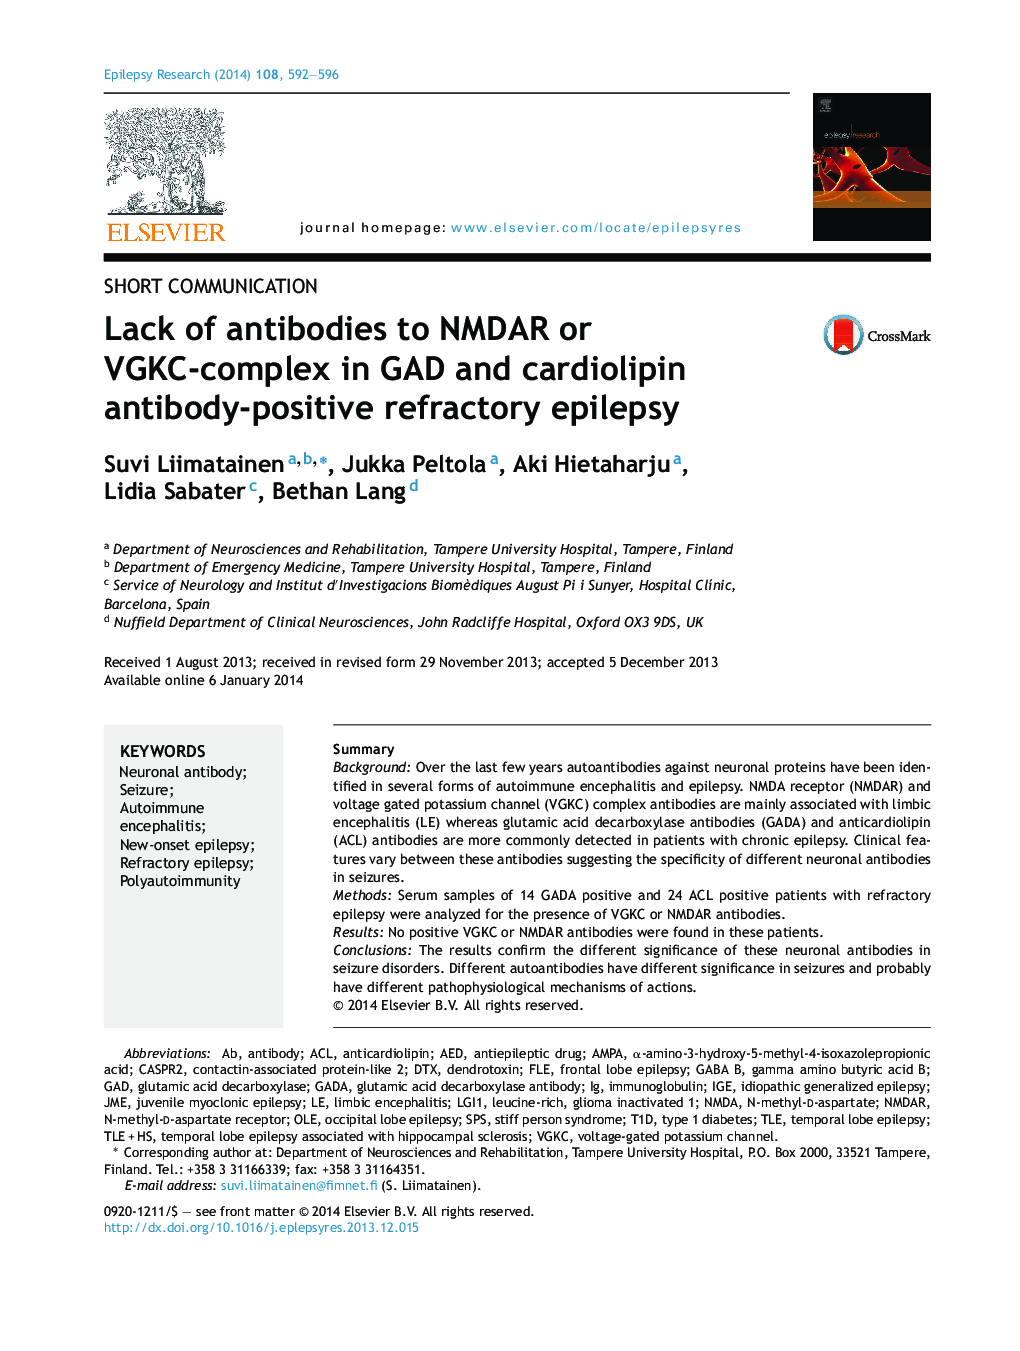 Lack of antibodies to NMDAR or VGKC-complex in GAD and cardiolipin antibody-positive refractory epilepsy